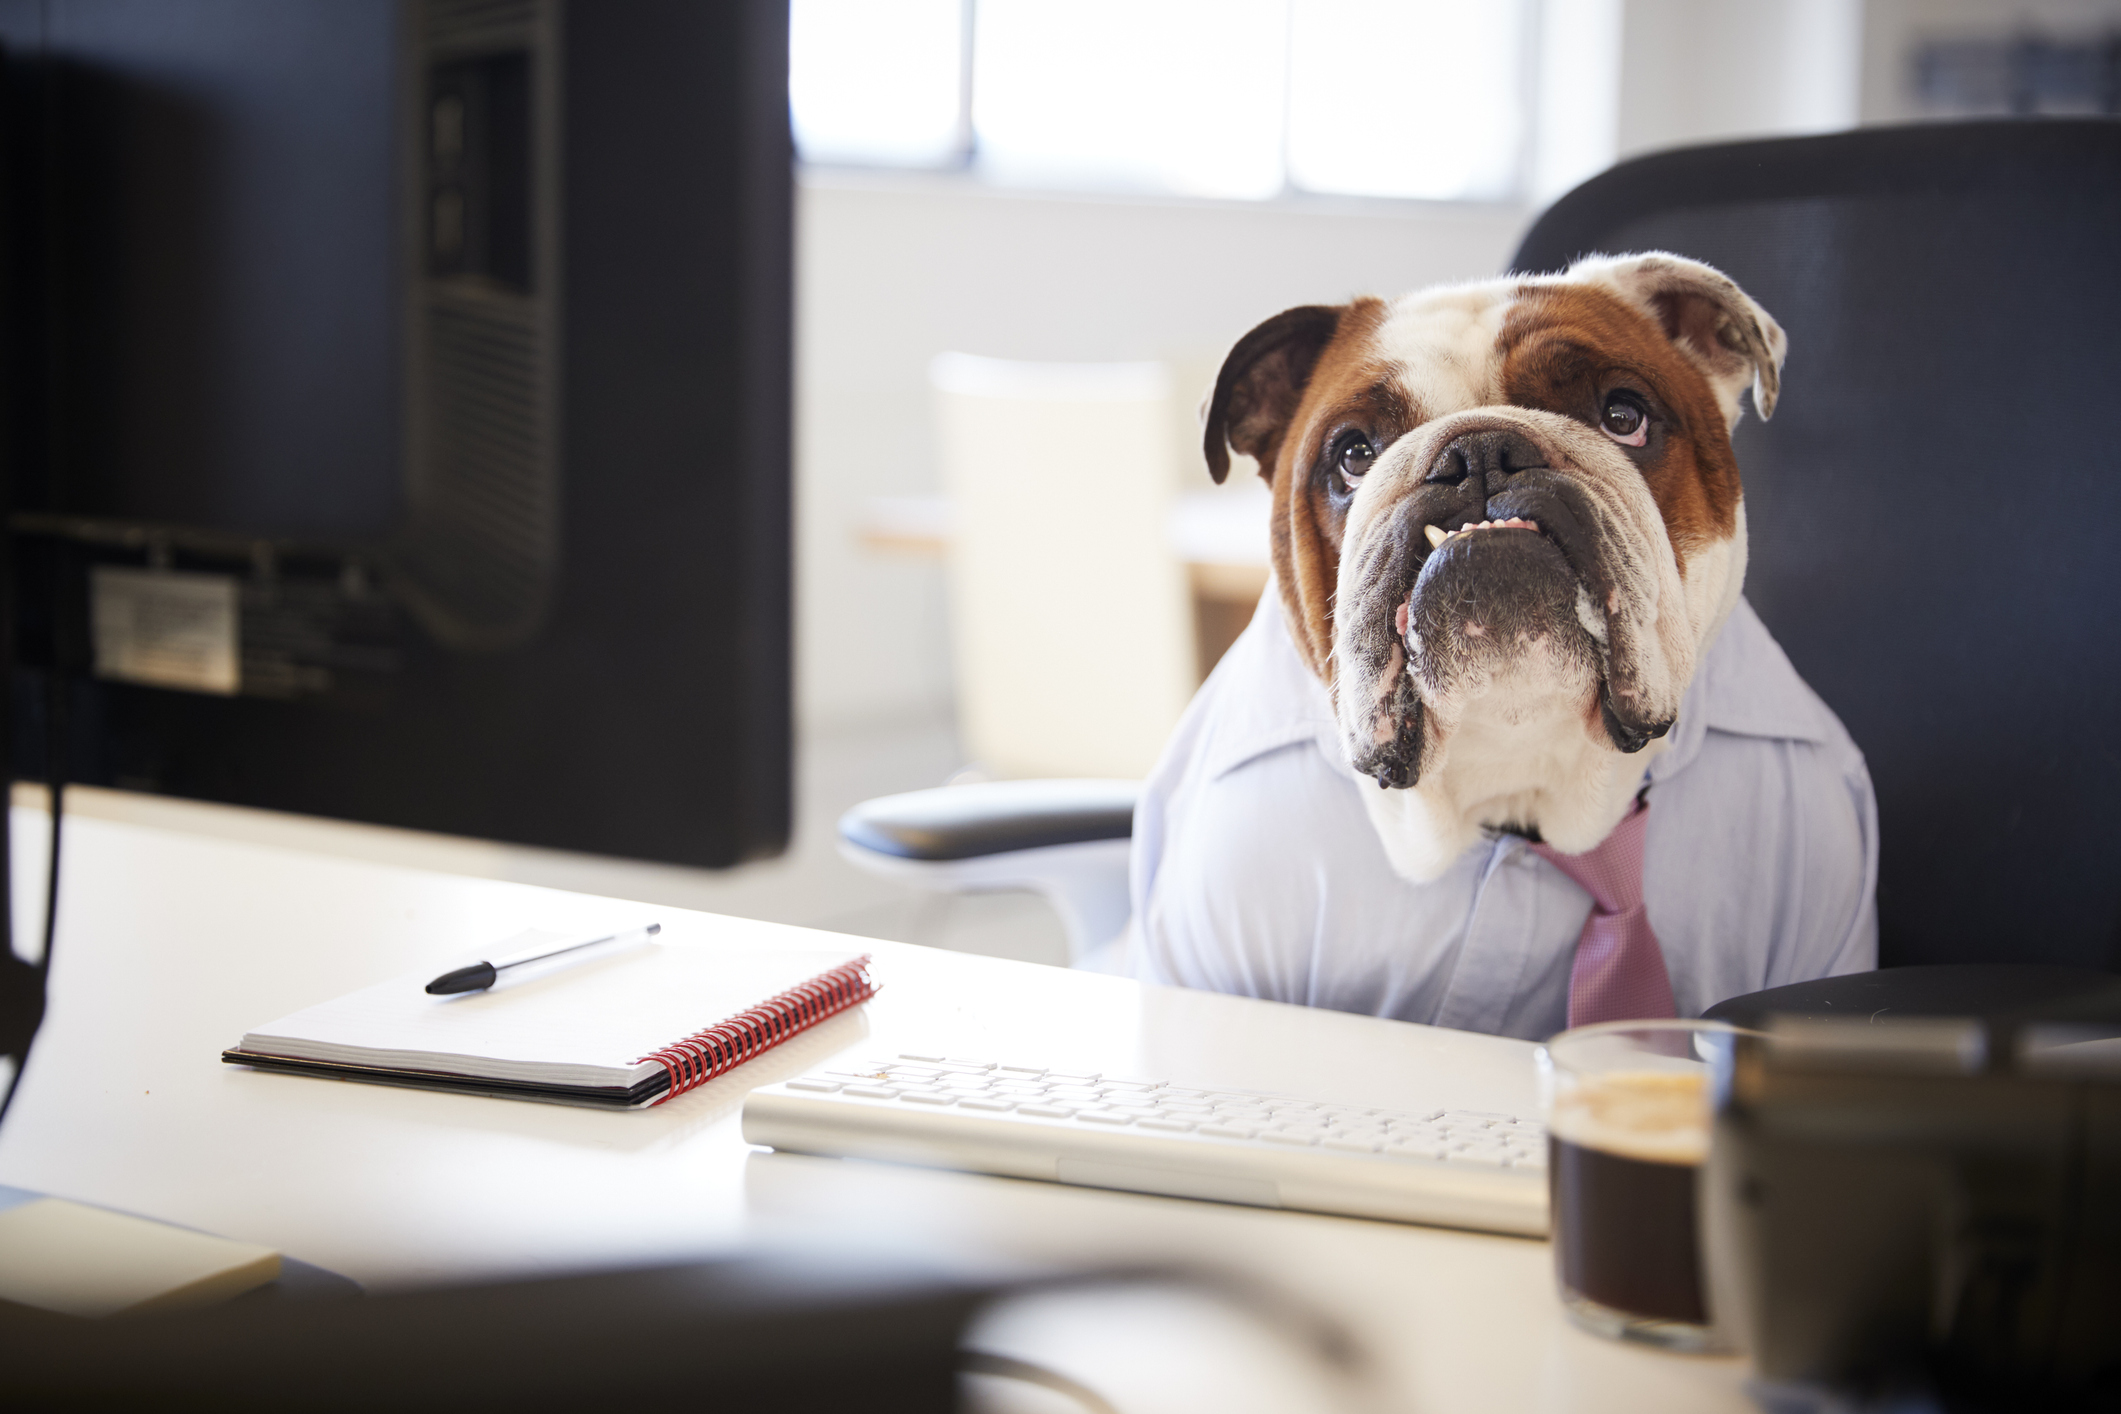 Picture of dog in a shirt and tie sitting at a desk.